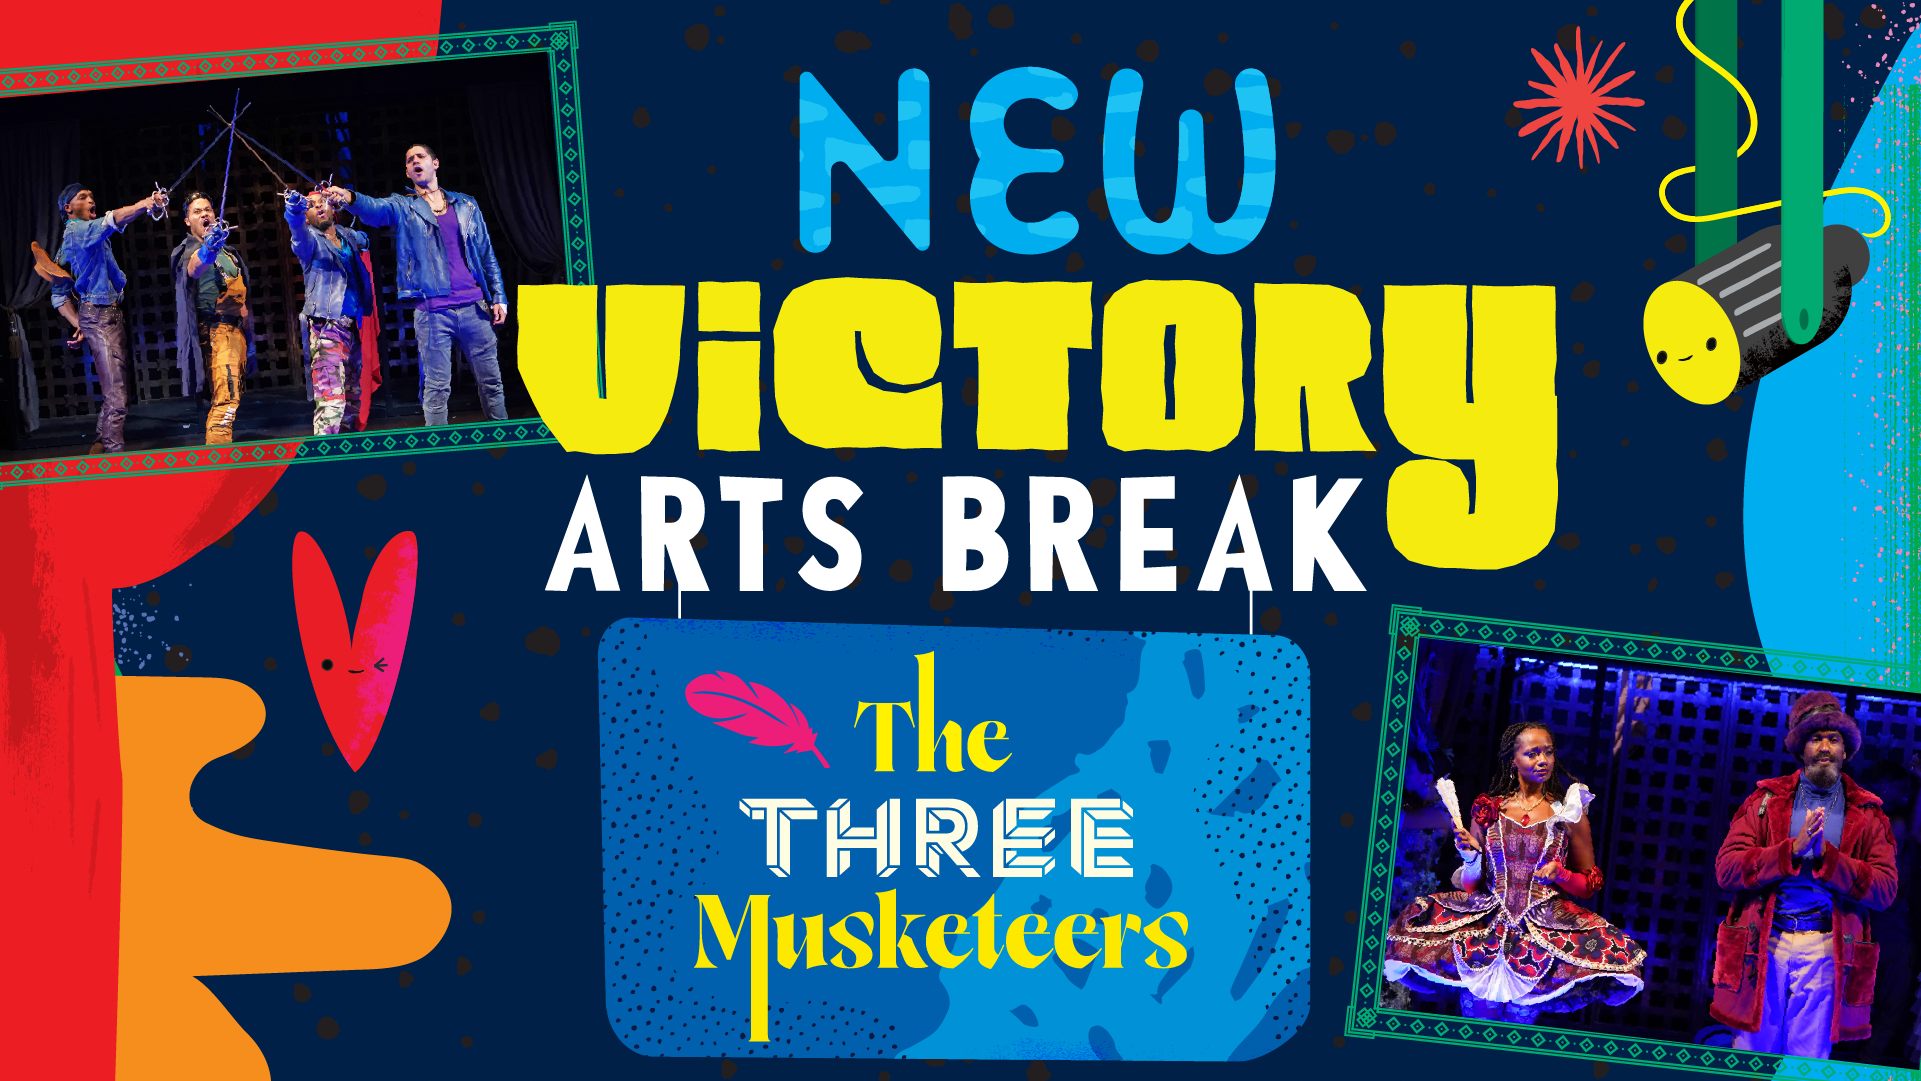 New Victory Arts Break: The Three Musketeers | New Victory Theater